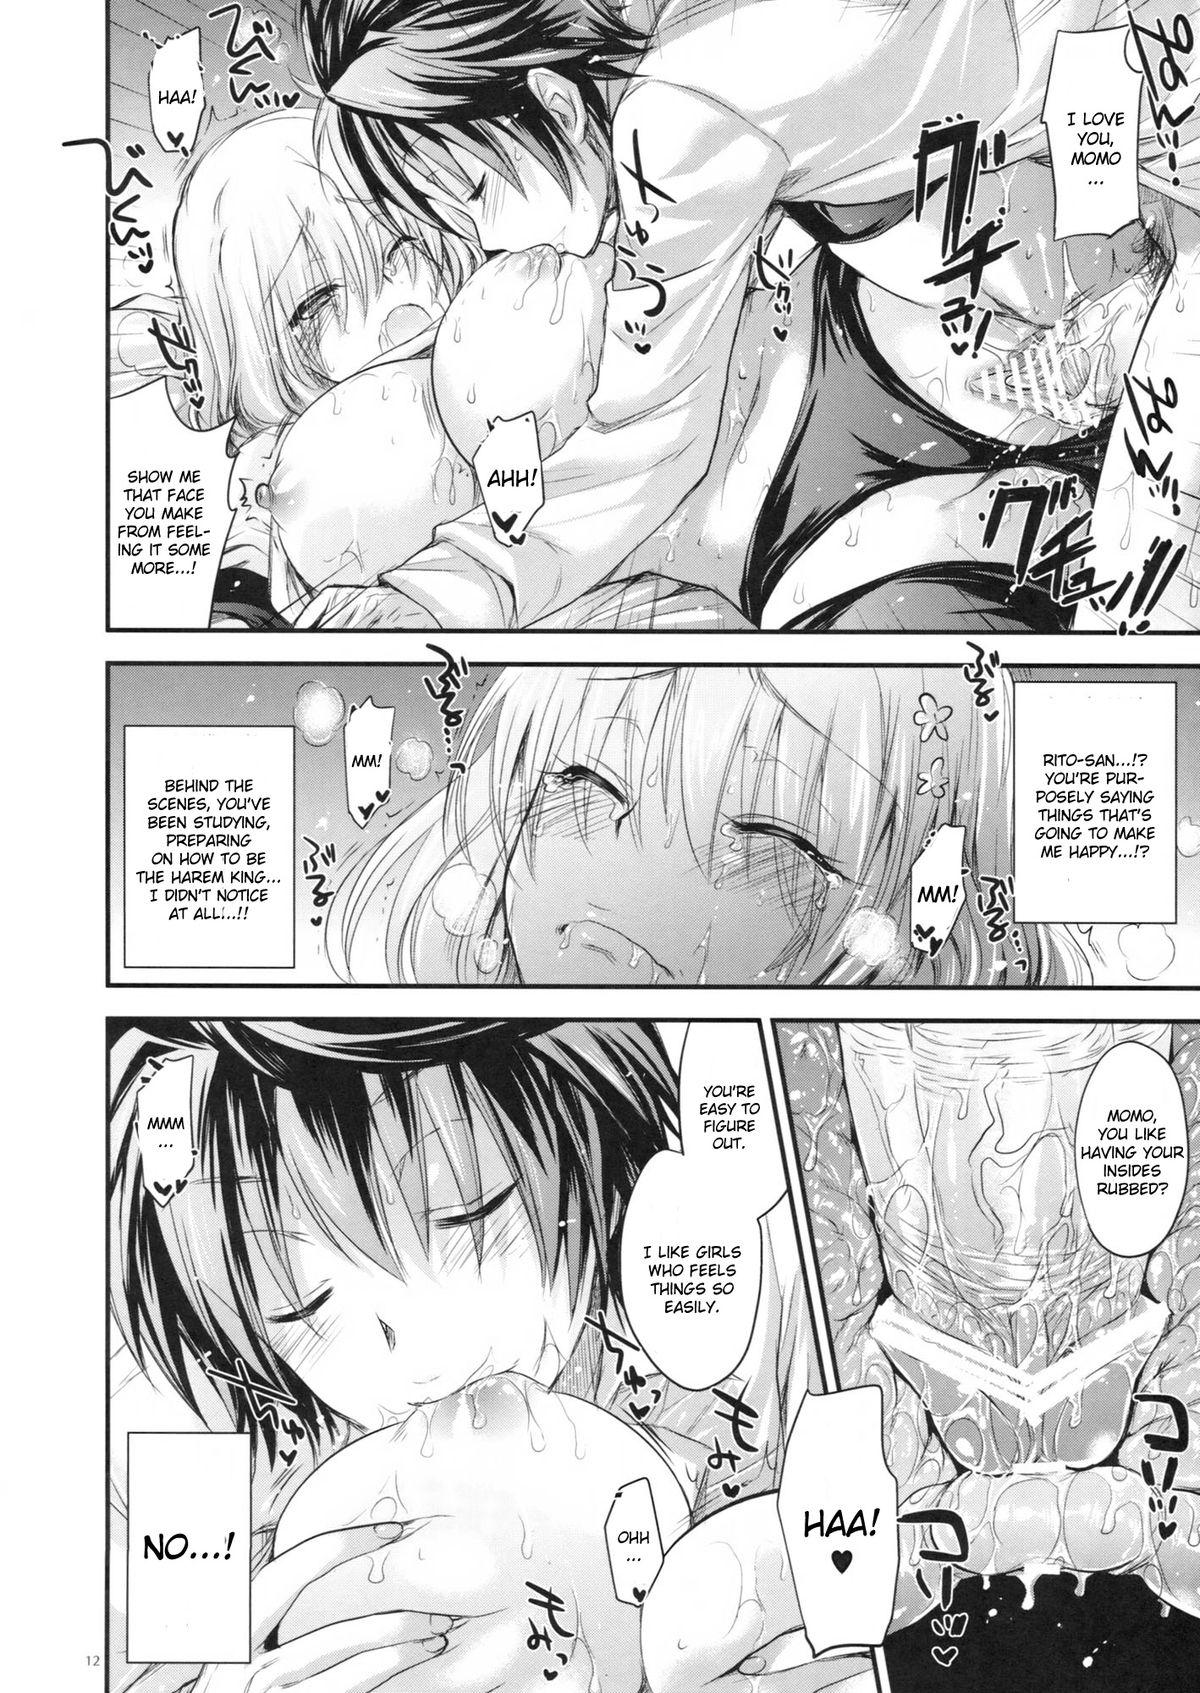 Muscles GARIGARI 48 - To love-ru Famosa - Page 11